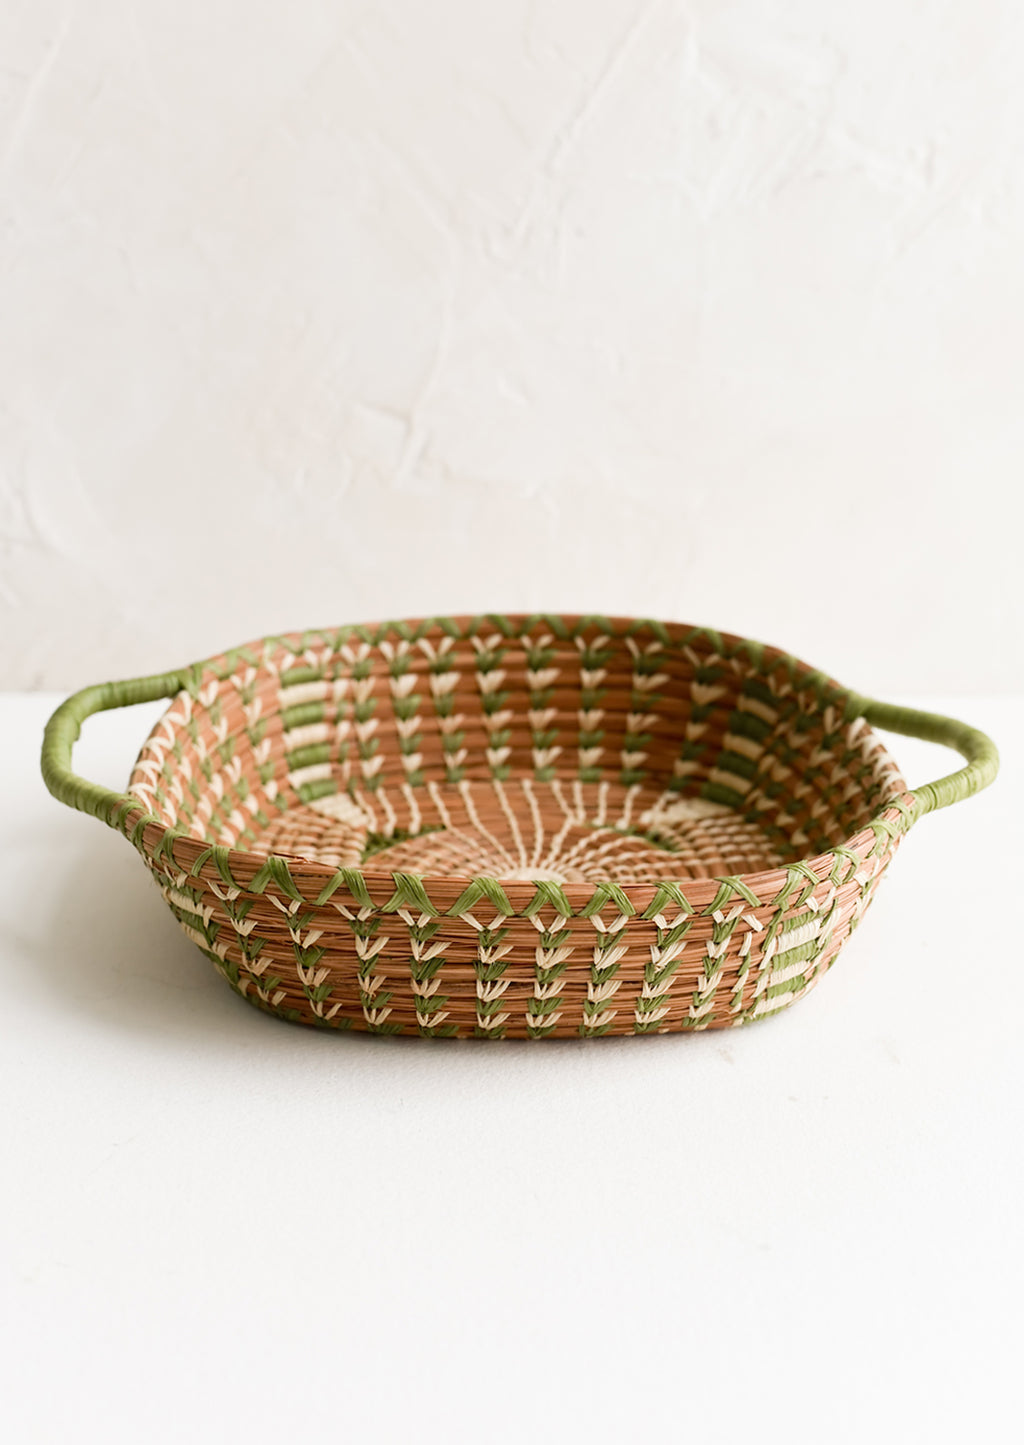 2: A shallow basket in rounded square shape with rectangular green handles at sides.